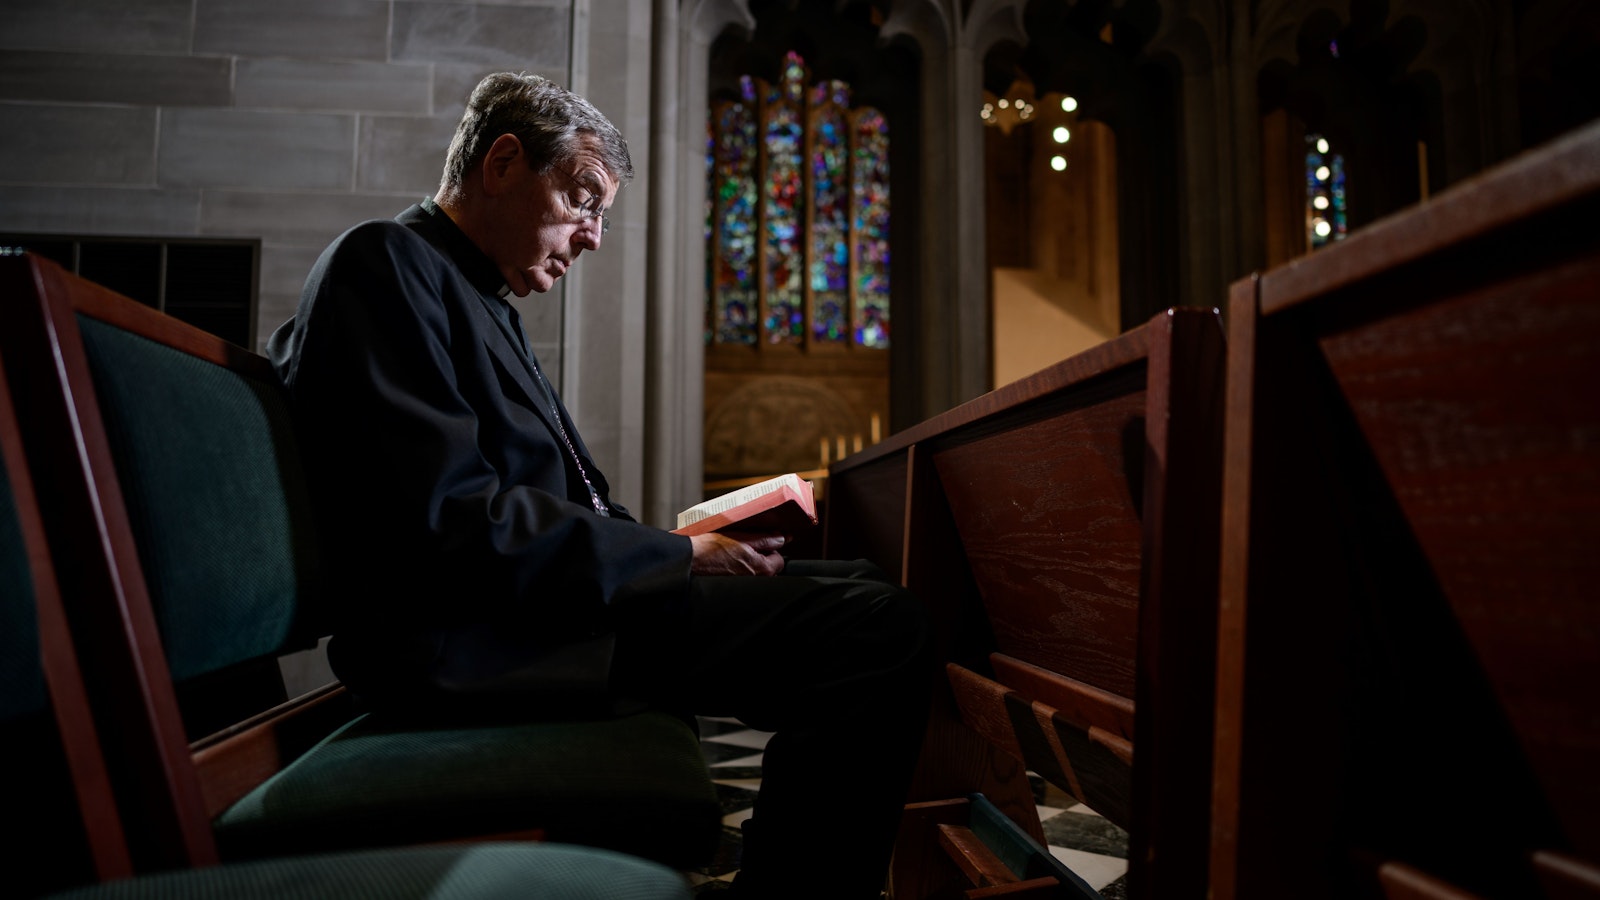 Archbishop Vigneron takes a quiet moment in prayer in the adoration chapel of the Cathedral of the Most Blessed Sacrament in Detroit on March 7, 2023. (Marek Dziekonski | Detroit Catholic)